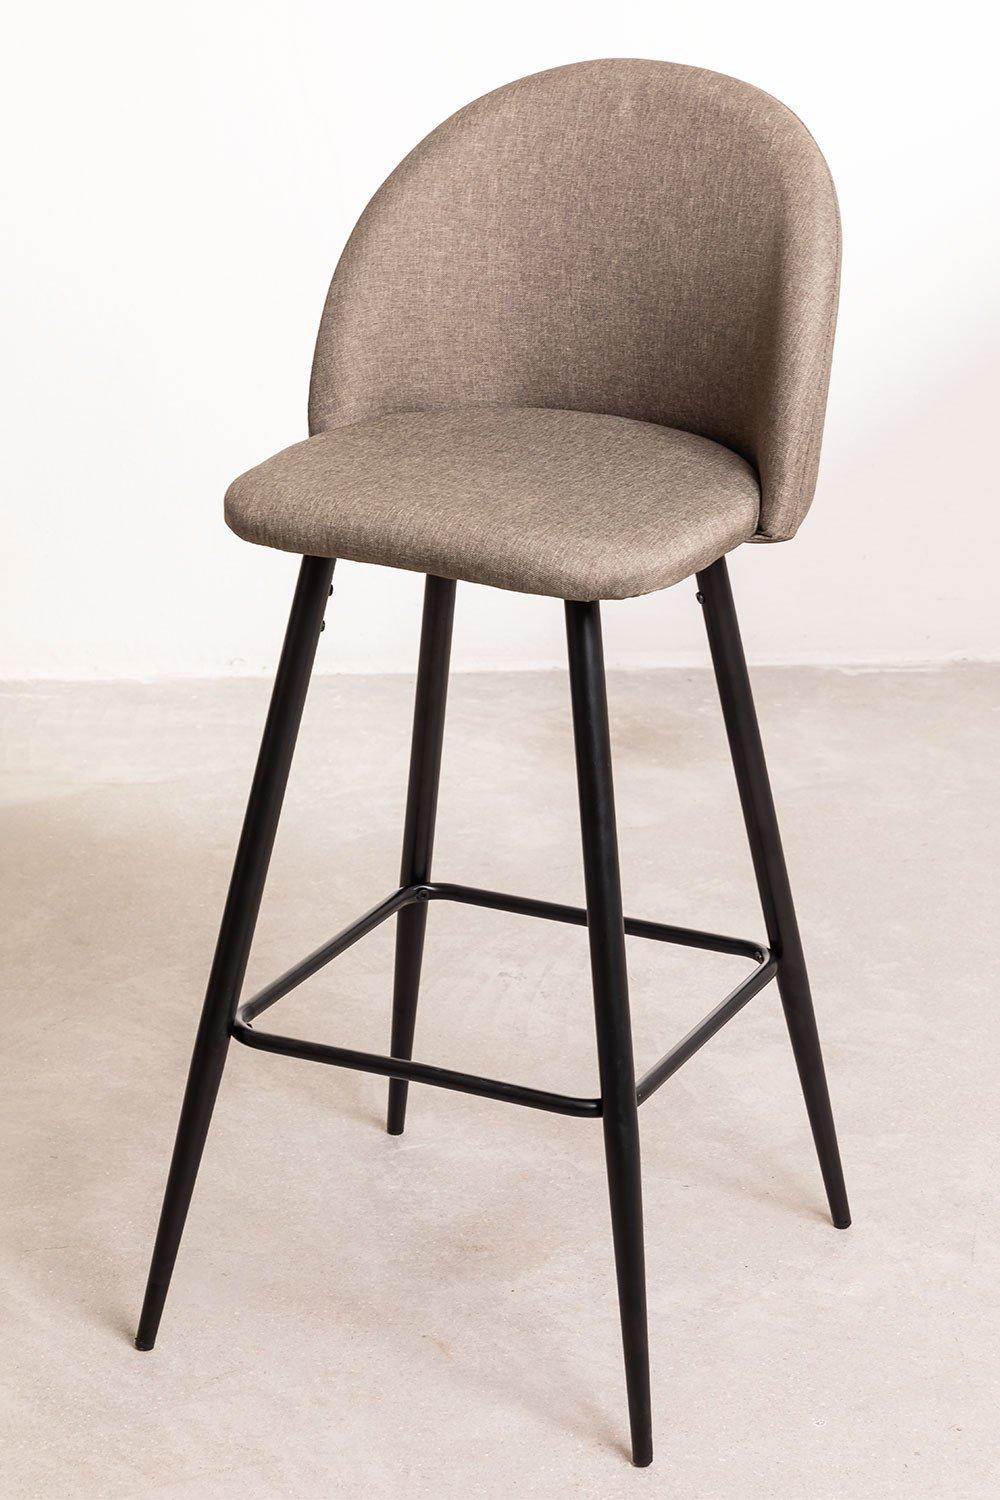 Tabouret rond lin 77cm n gris taupe